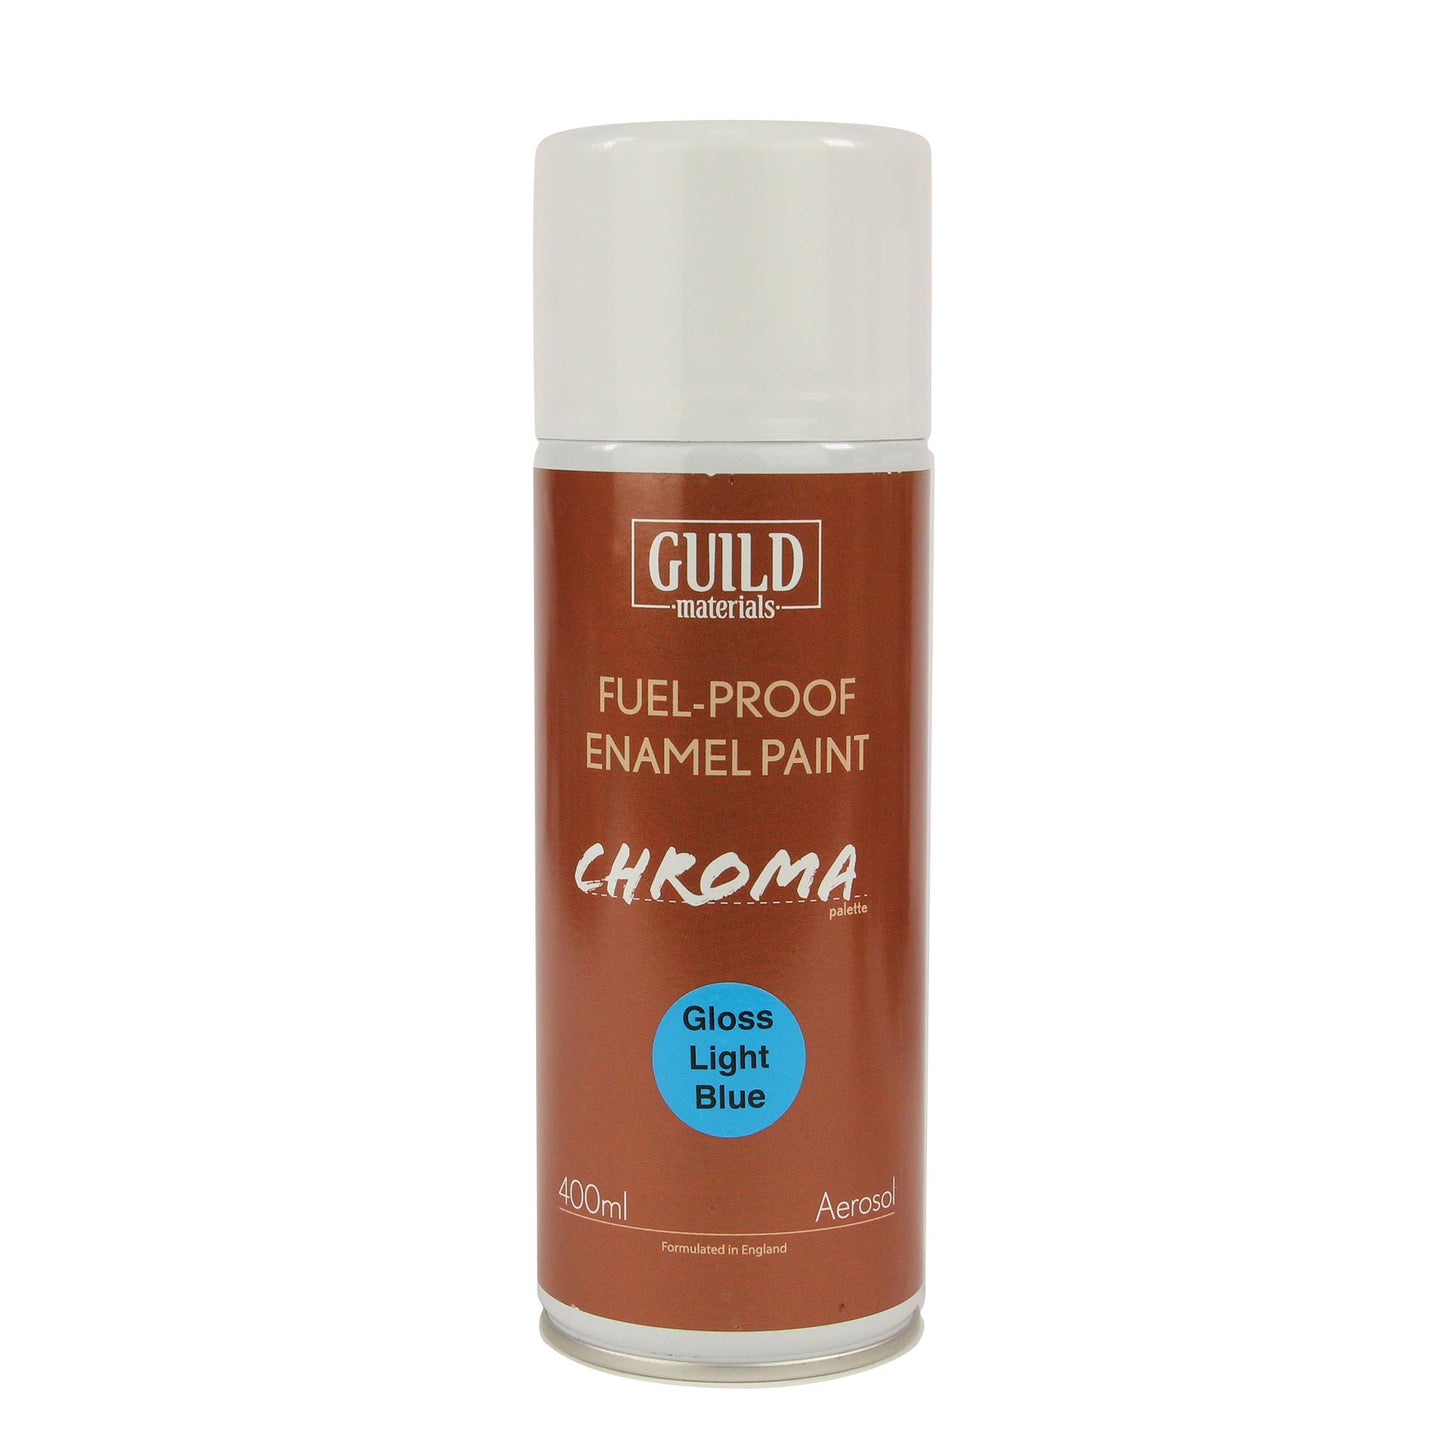 Load image into Gallery viewer, Chroma Enamel Fuelproof Paint Gloss Light Blue (400ml Aerosol)
